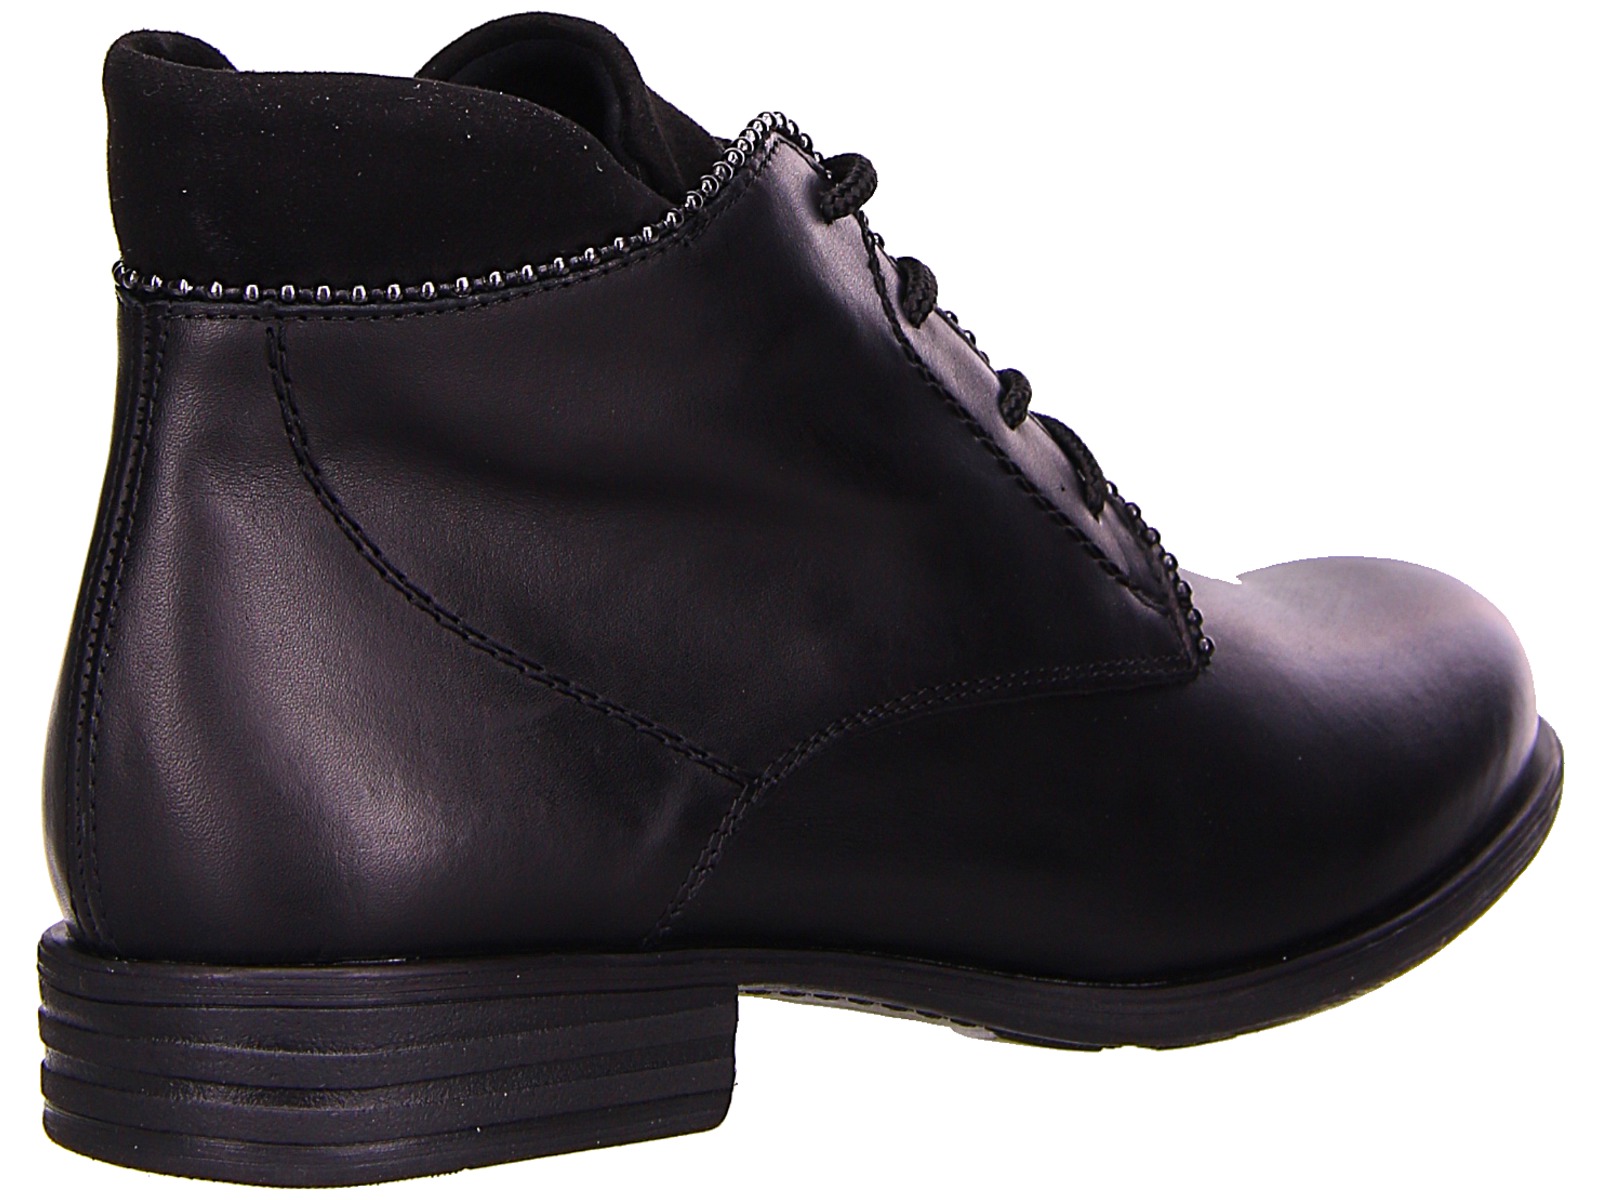 Remonte Boots R0977-01